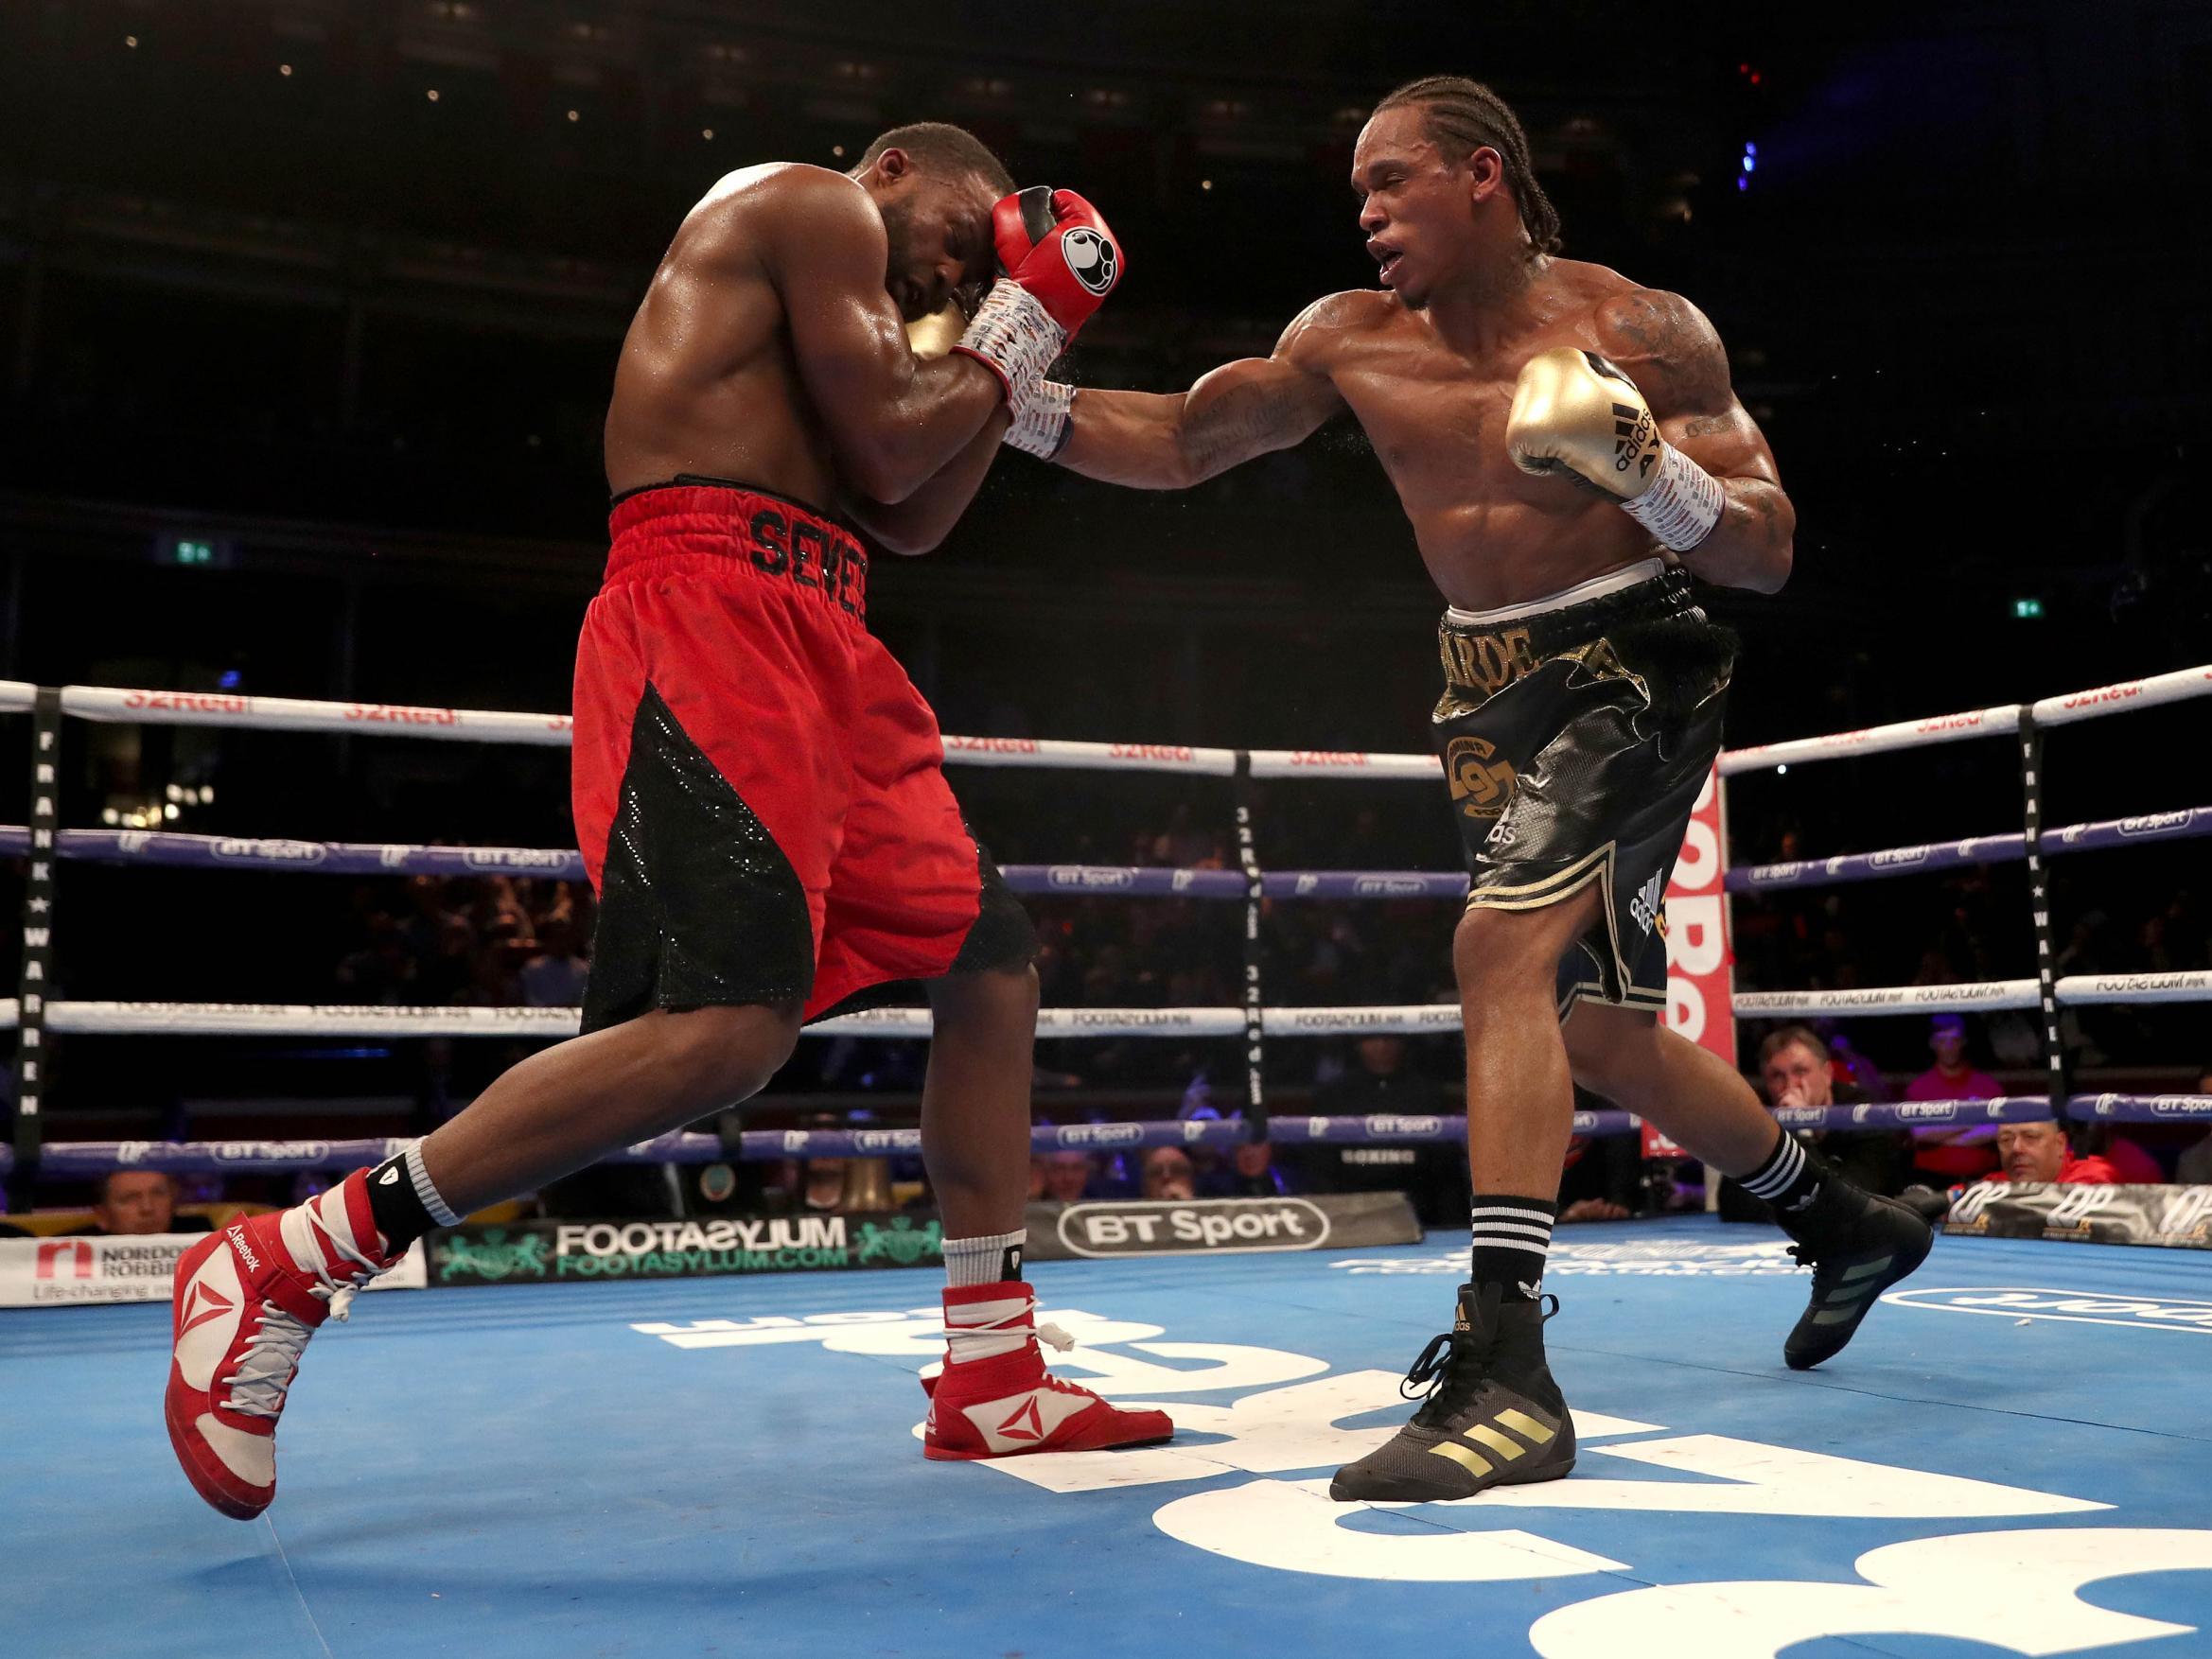 Yarde hopes to shock the Russian and become a world champion